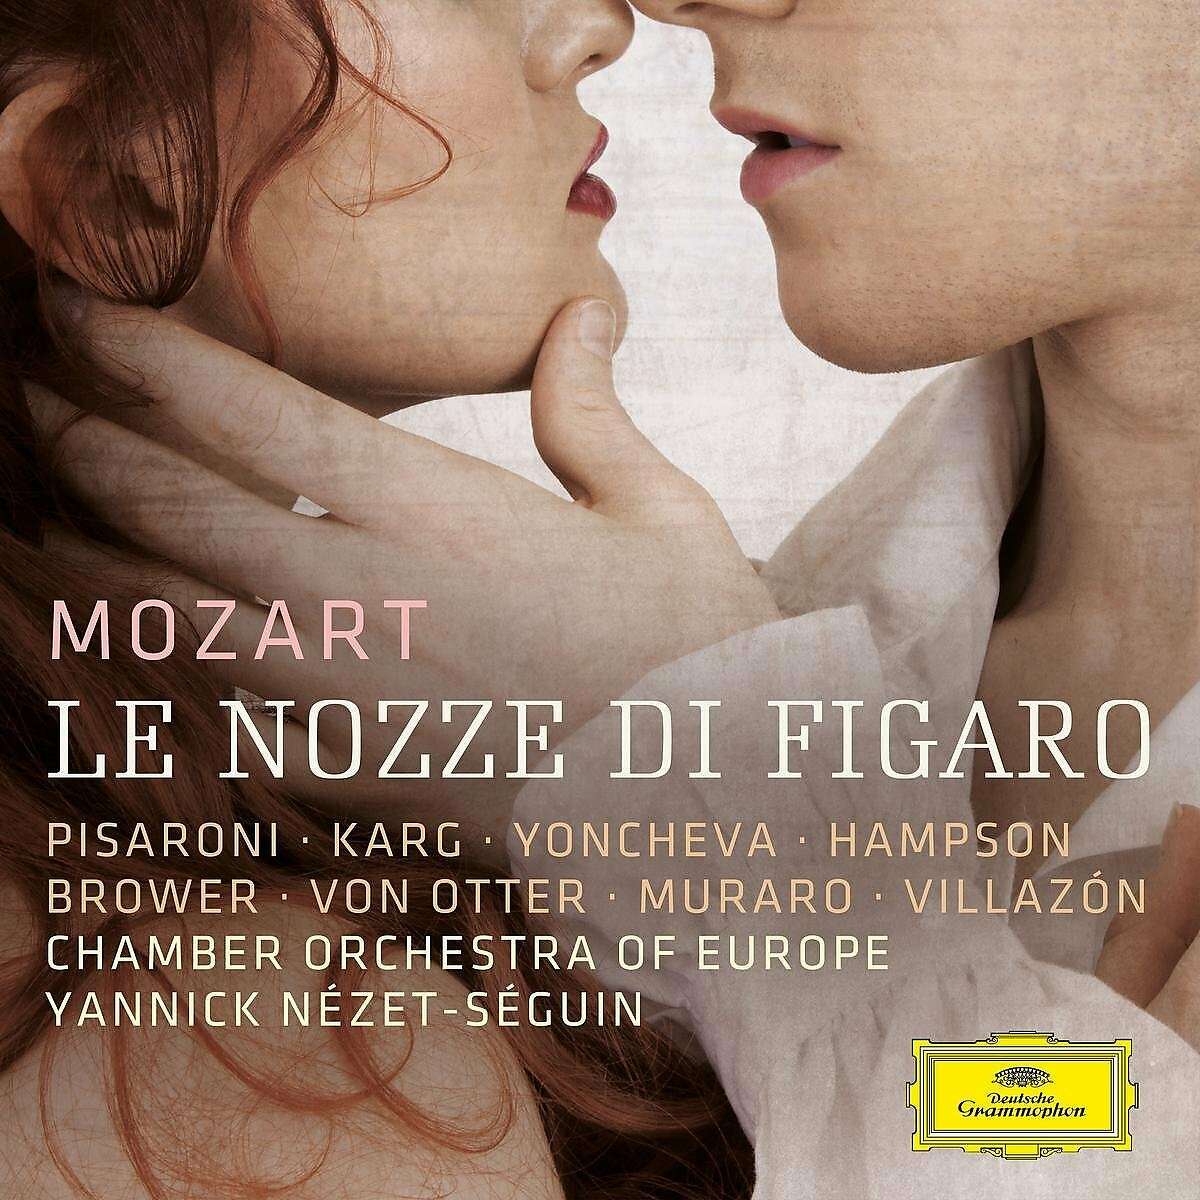 Mozart, "The Marriage of Figaro"